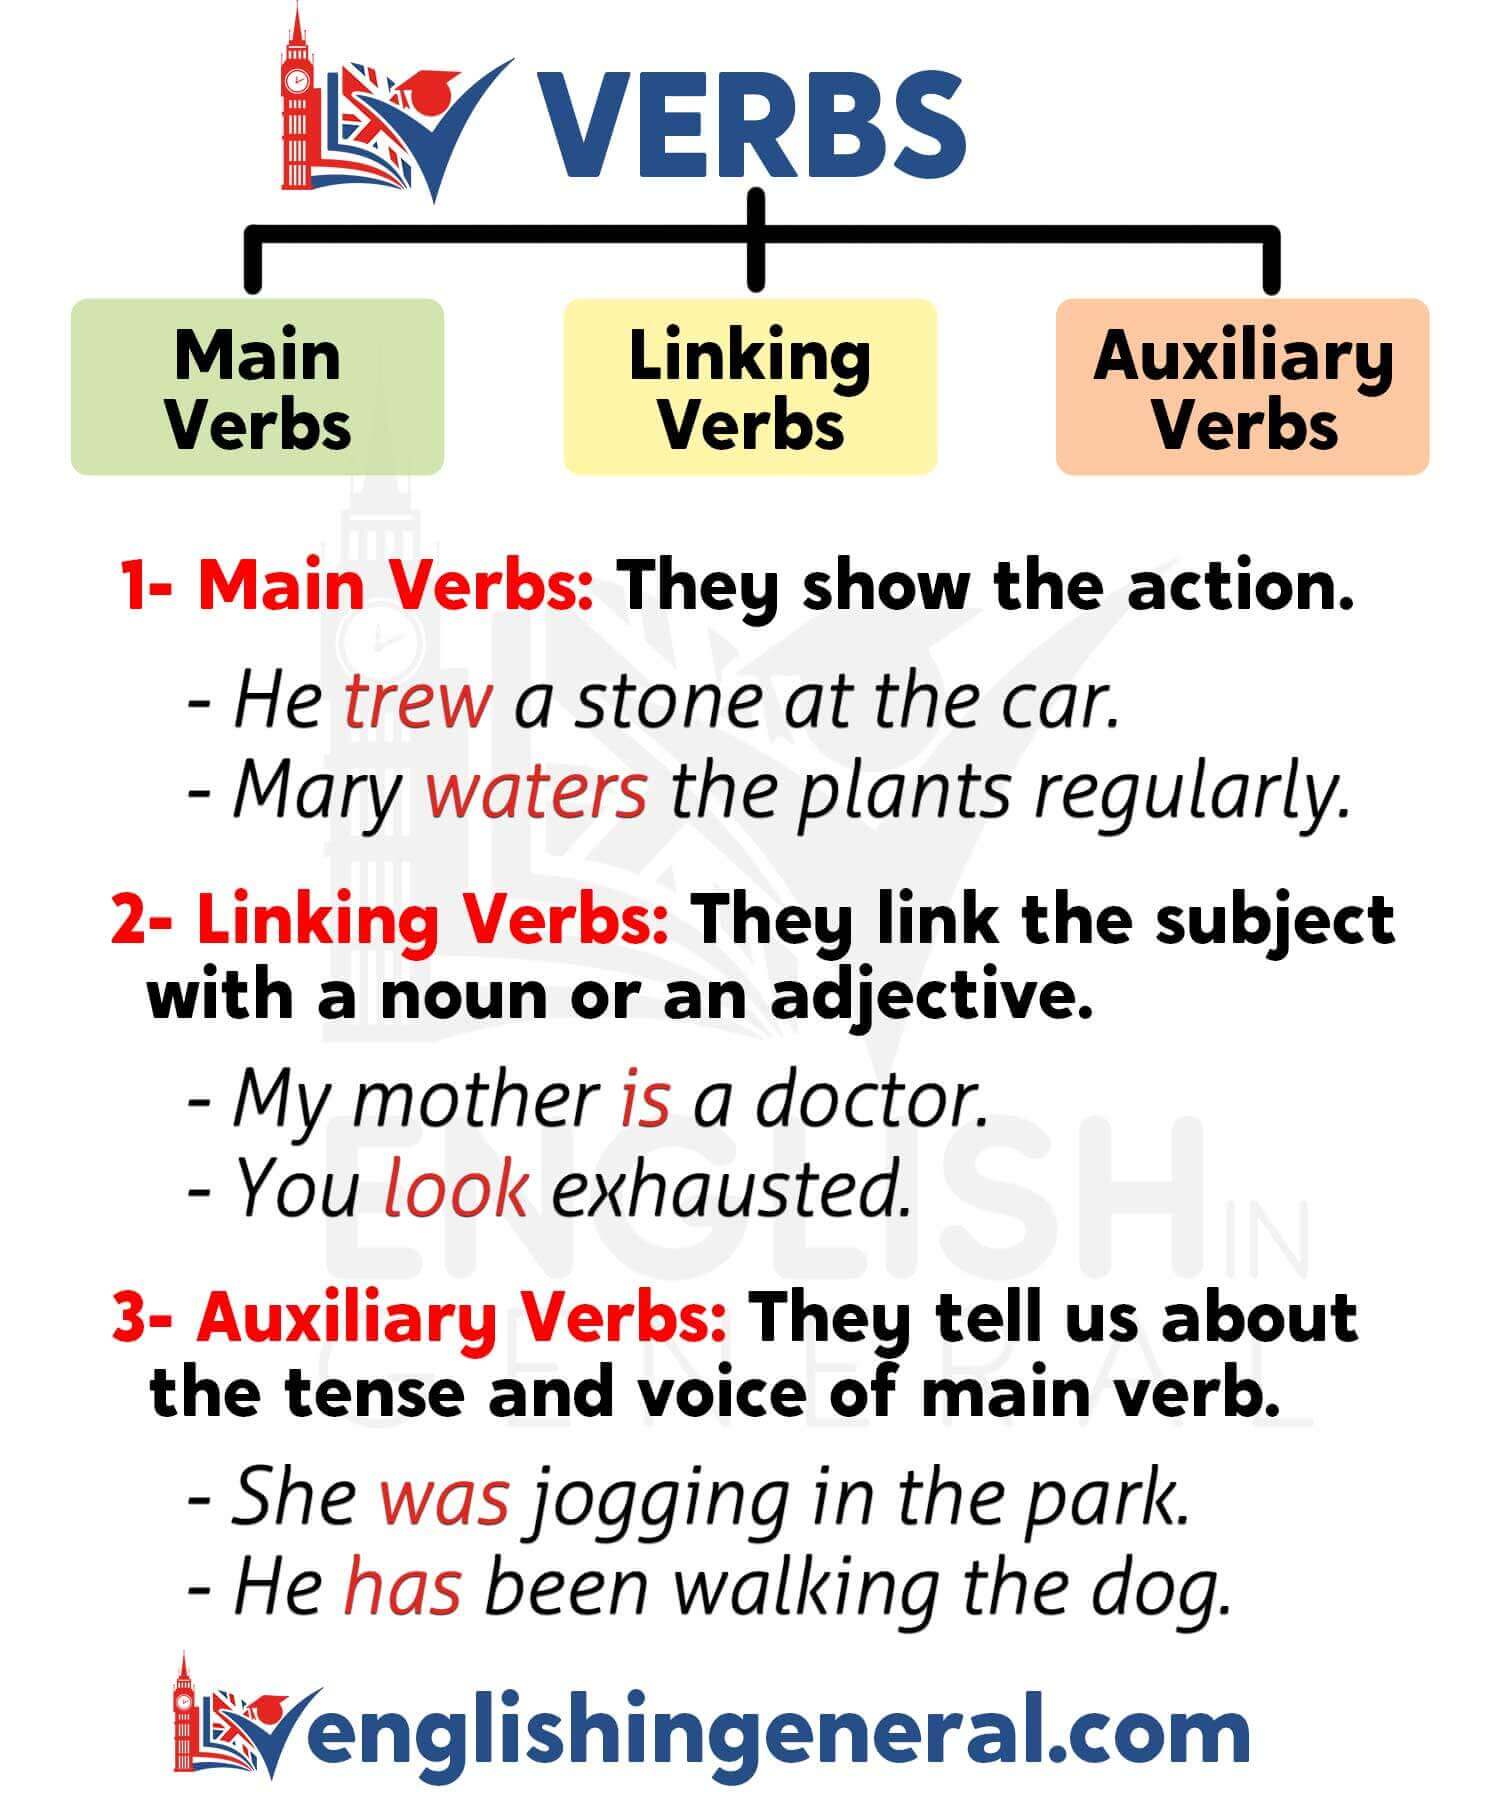 verbs-in-english-grammar-lessons-english-in-general